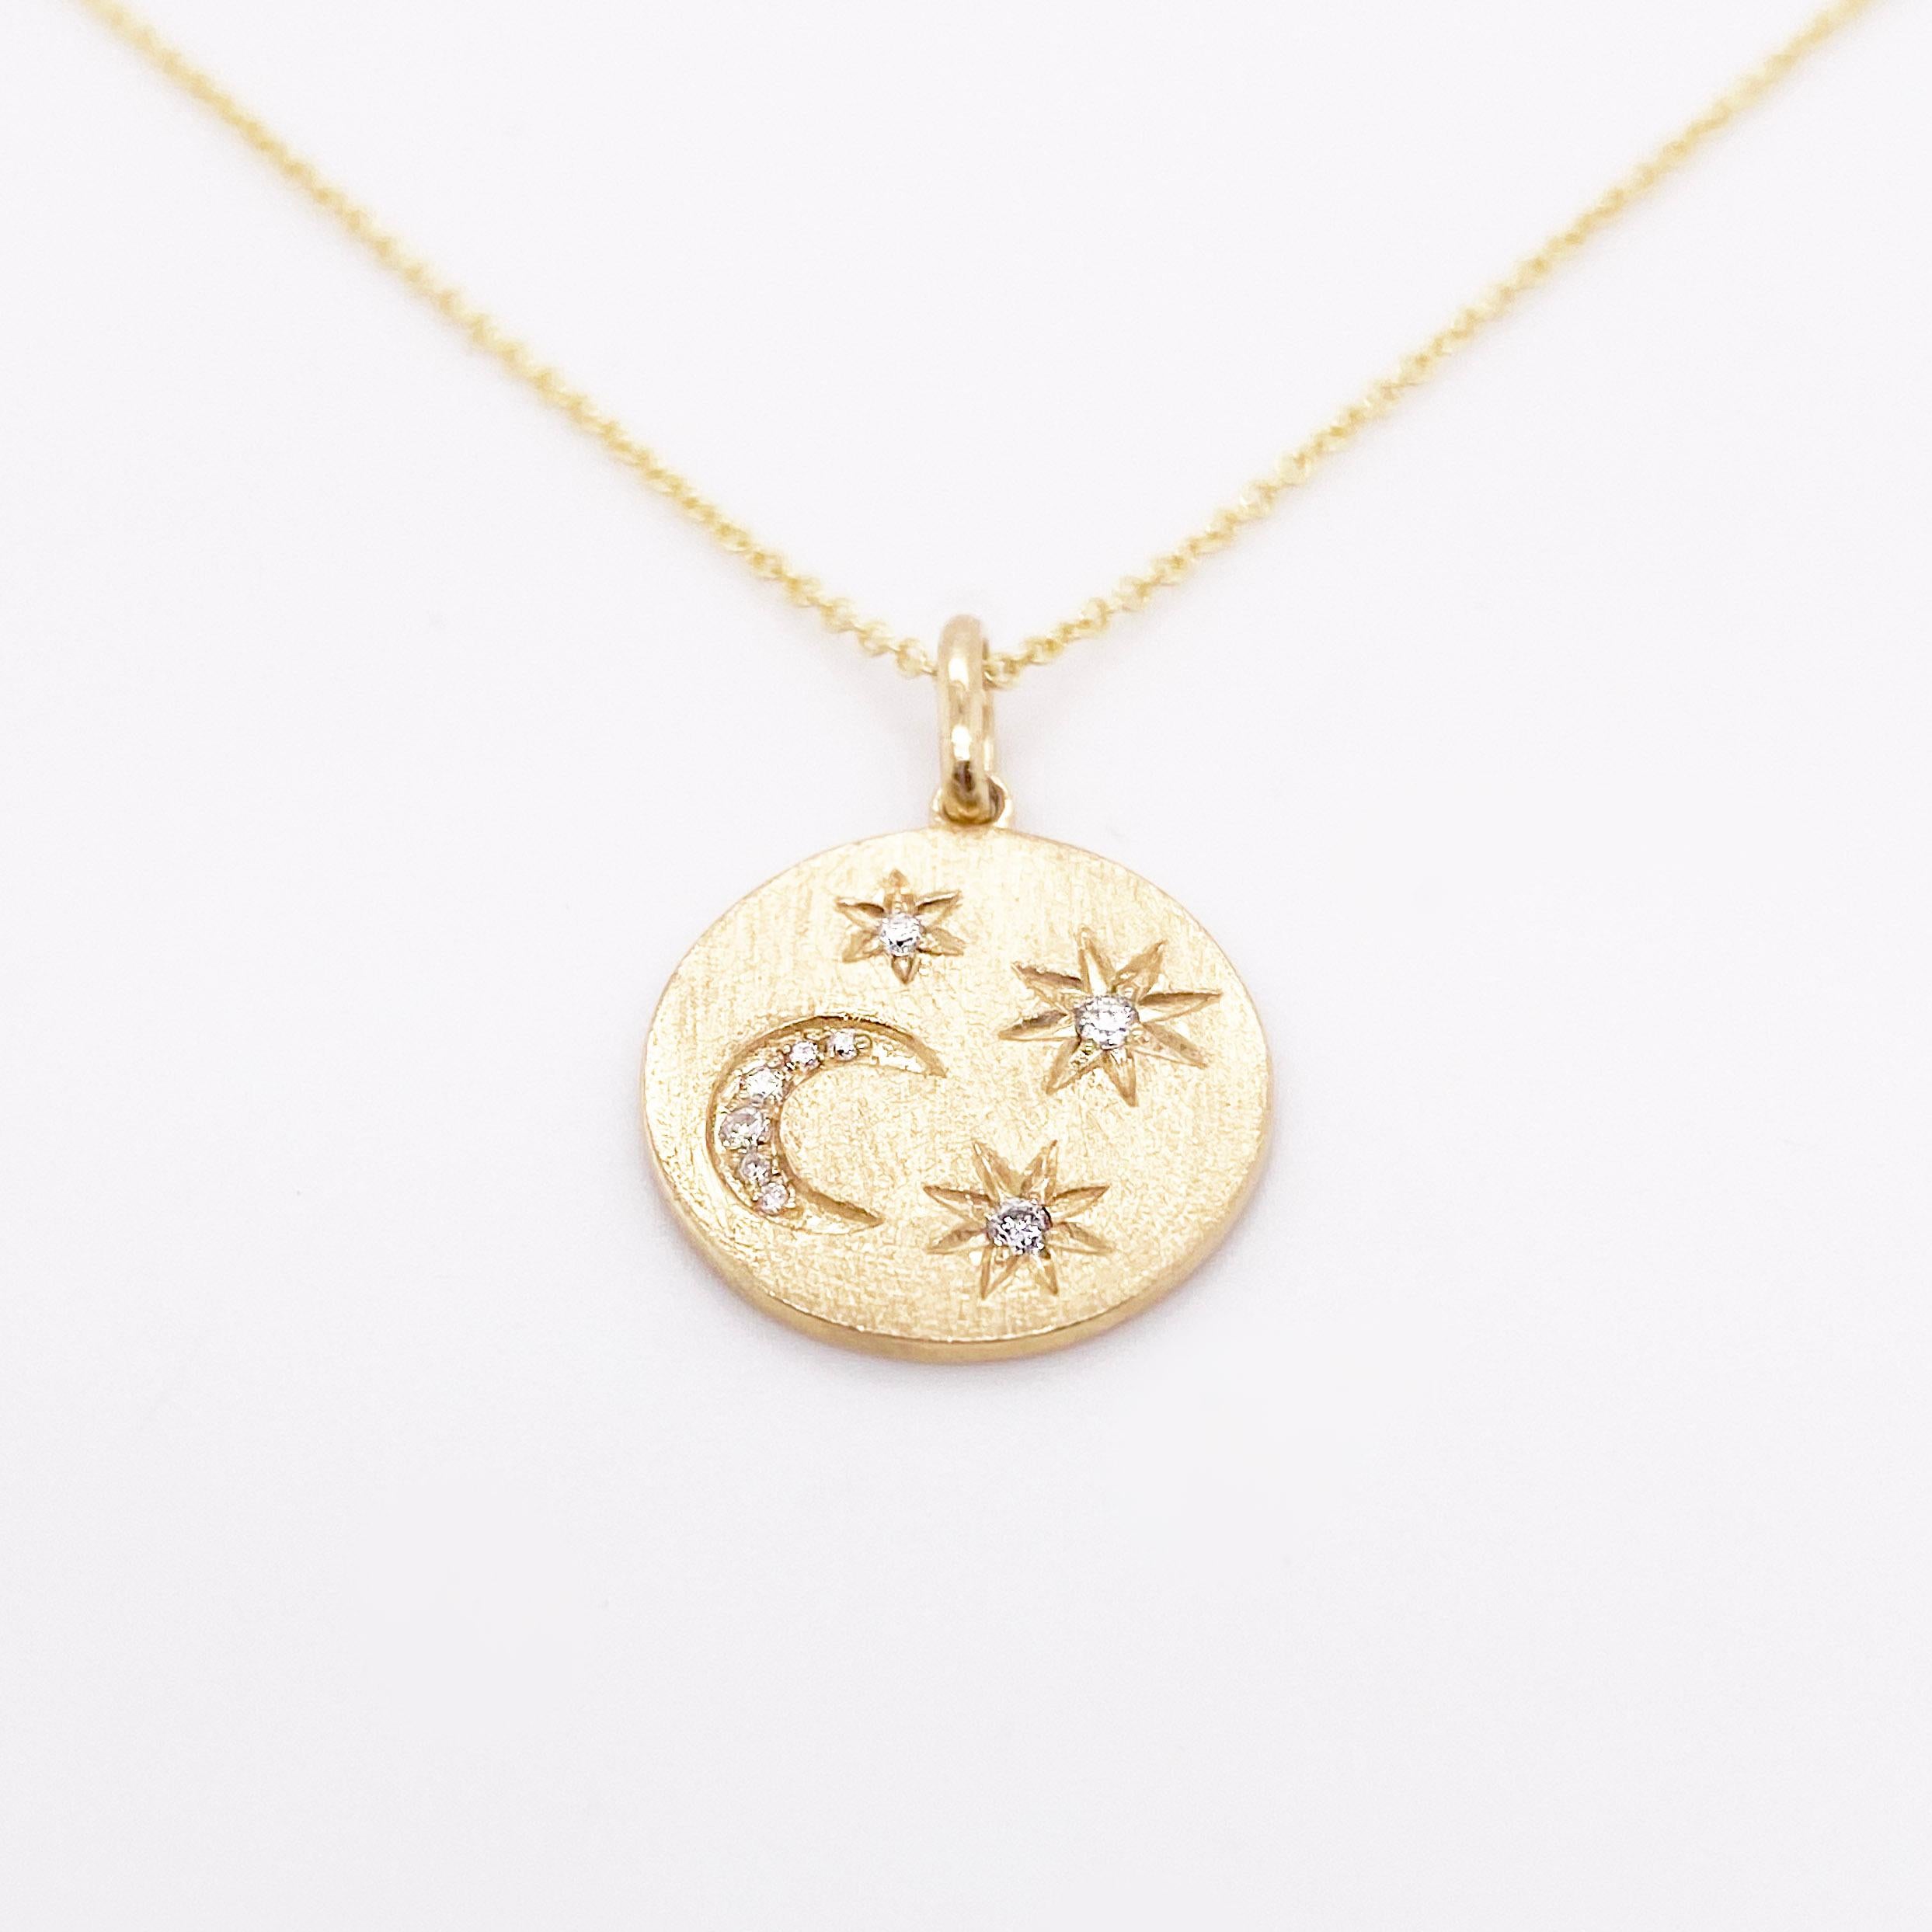 This is the perfect everyday necklace that you've been looking for. The moon and stars sparkle with diamonds in each of them and a total .09 carat weight. This necklace is so versatile because it looks great on its own or added to a stack. Where it